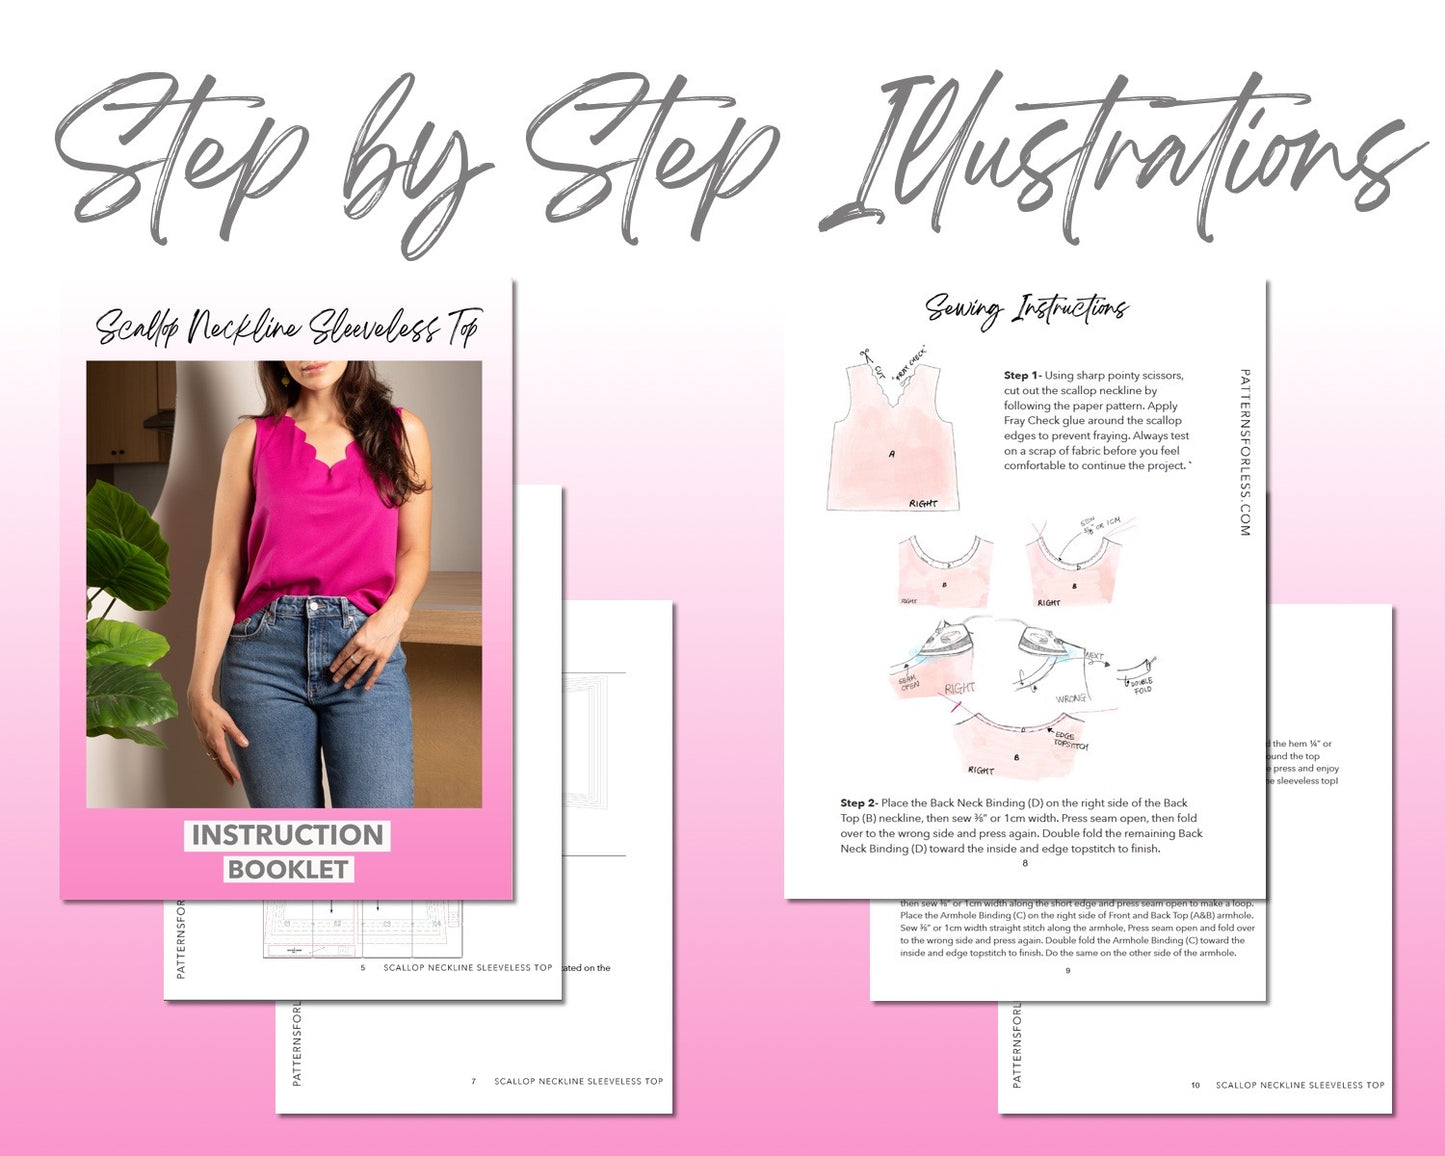 Scallop Neckline Sleeveless Top sewing pattern step by step illustrations.